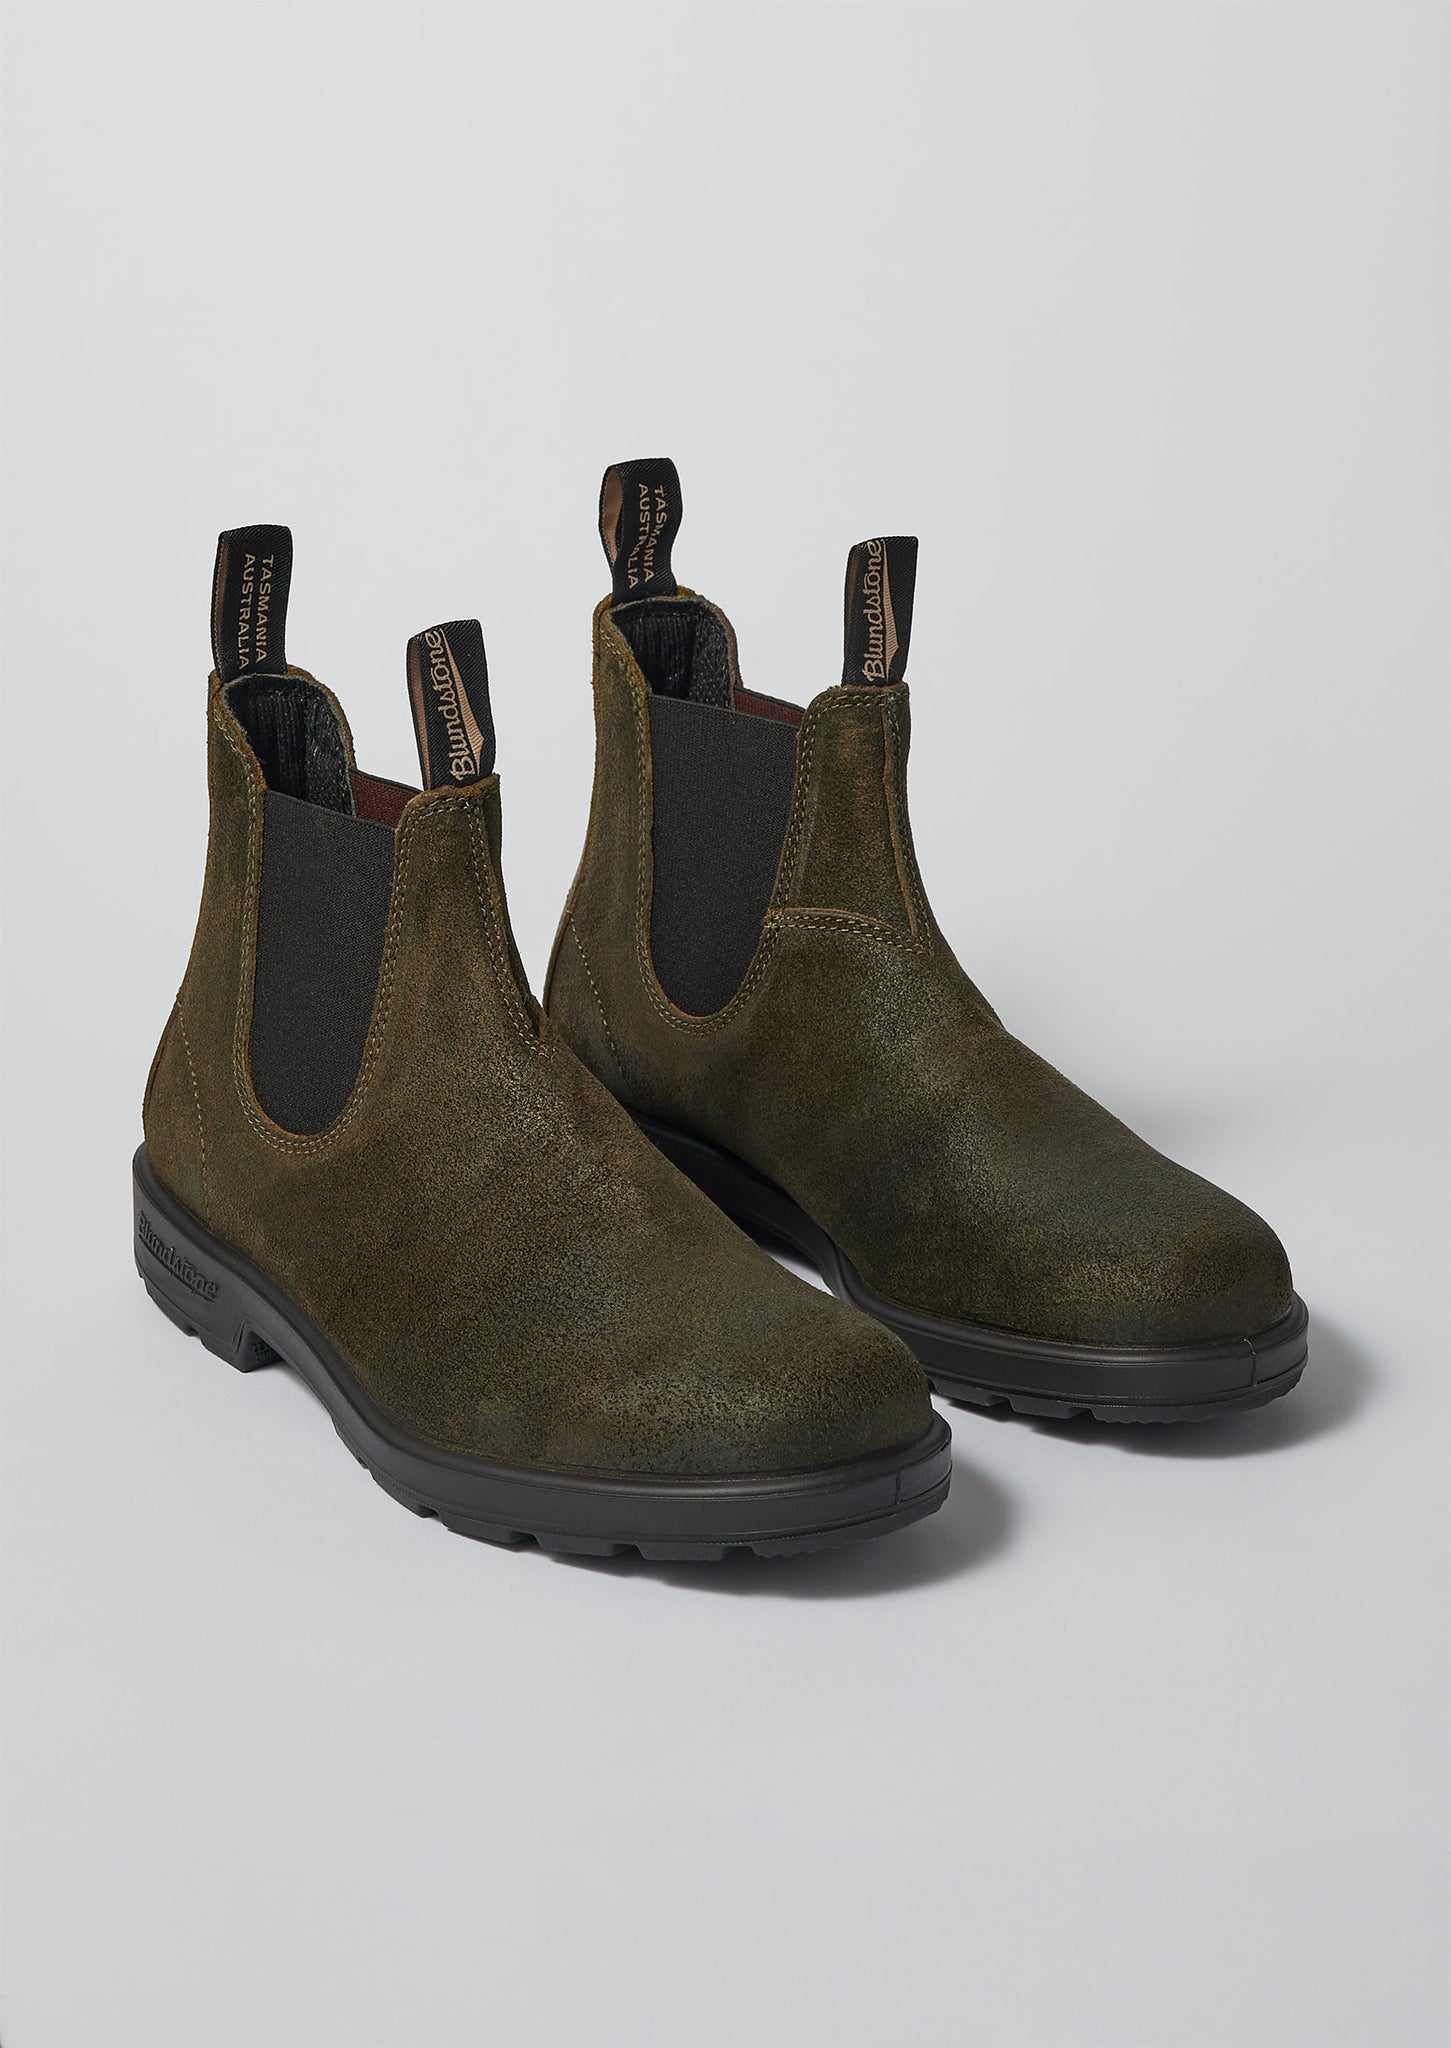 Blundstone Waxed Suede Chelsea Boots | Dark Olive